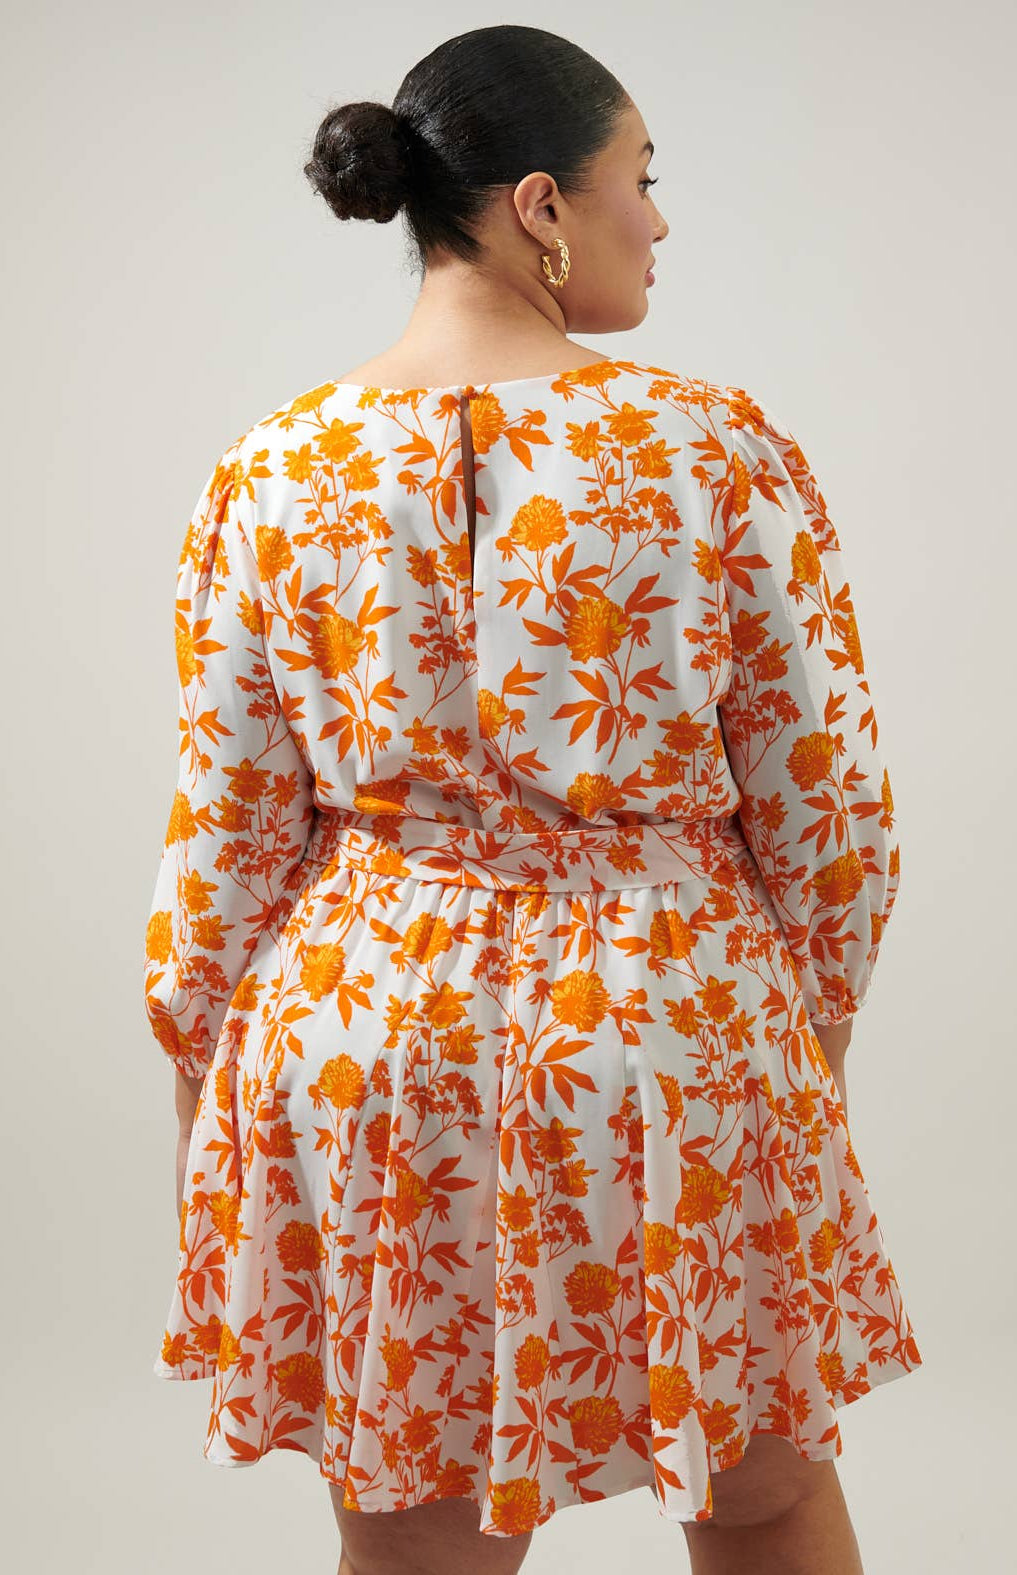 Plus Size Manzanilla Floral Collins Godet Mini Dress in Orange and Ivory Cute Hues